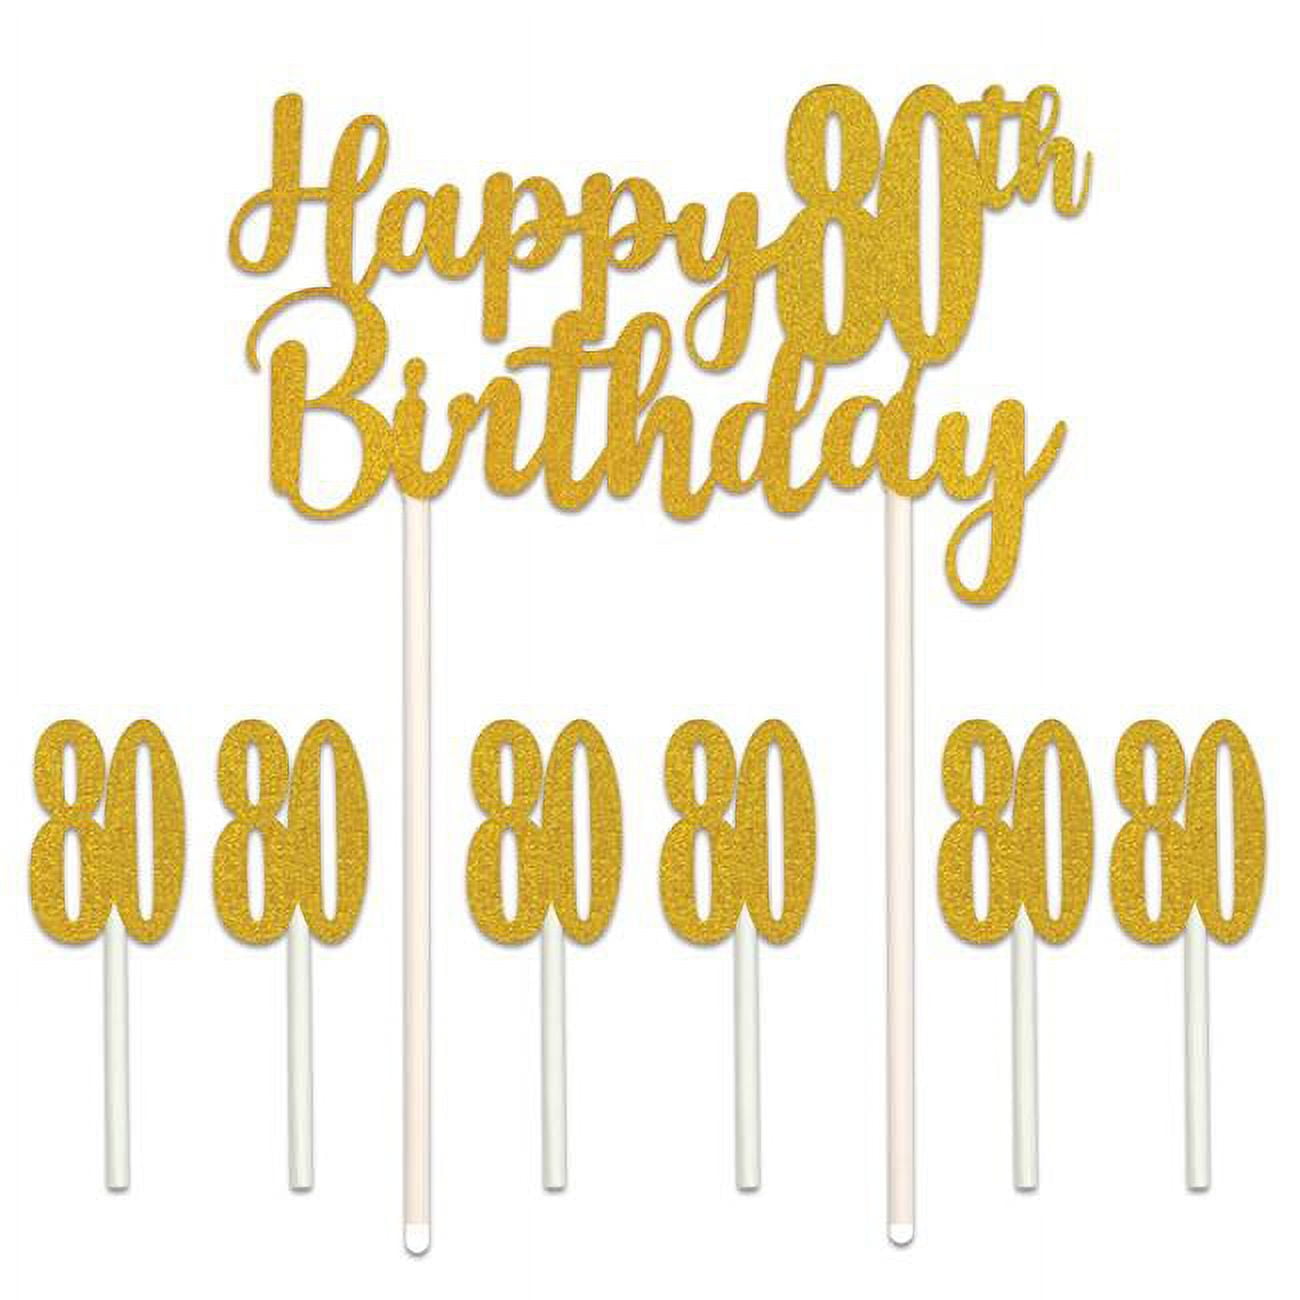 Picture of Beistle 53523-80 6 x 8.25 in. Happy 80th Birthday Cake Topper - Pack of 12